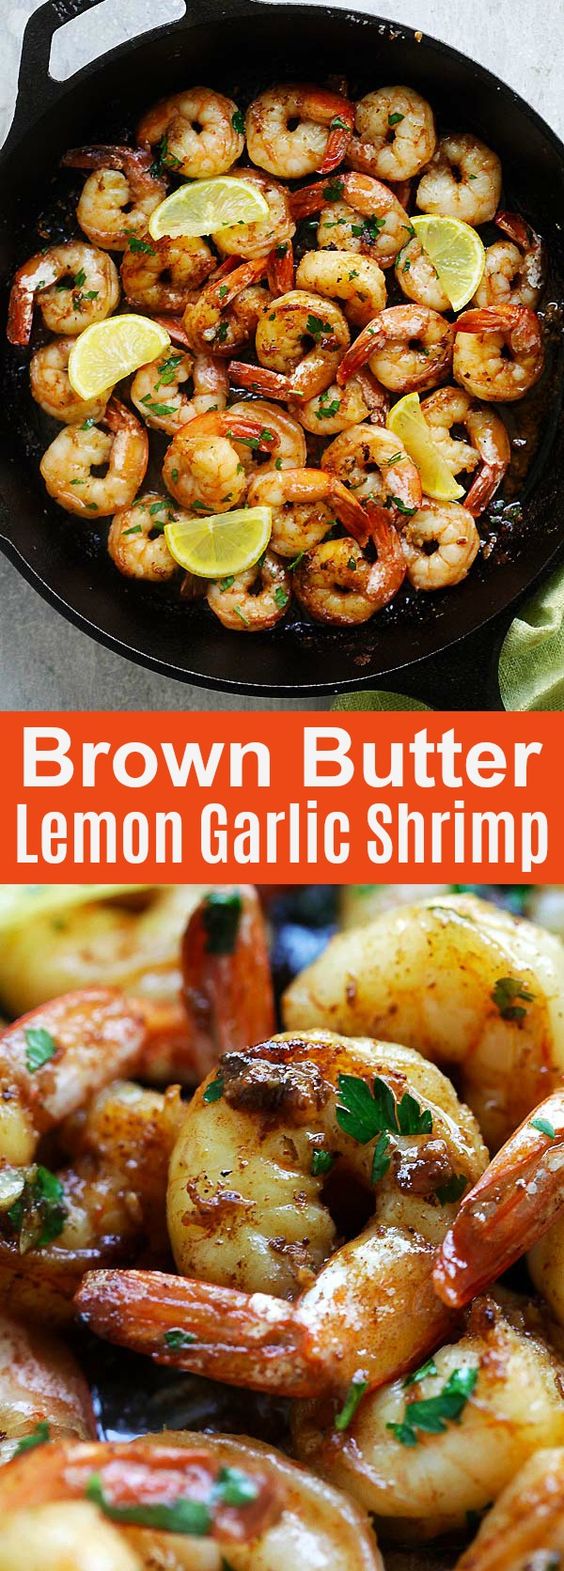 Brown Butter Lemon Garlic Shrimp - Garlicky, buttery, lemony goodness in each bite and the shrimp can be served with pasta, rice or salad | rasamalaysia.com